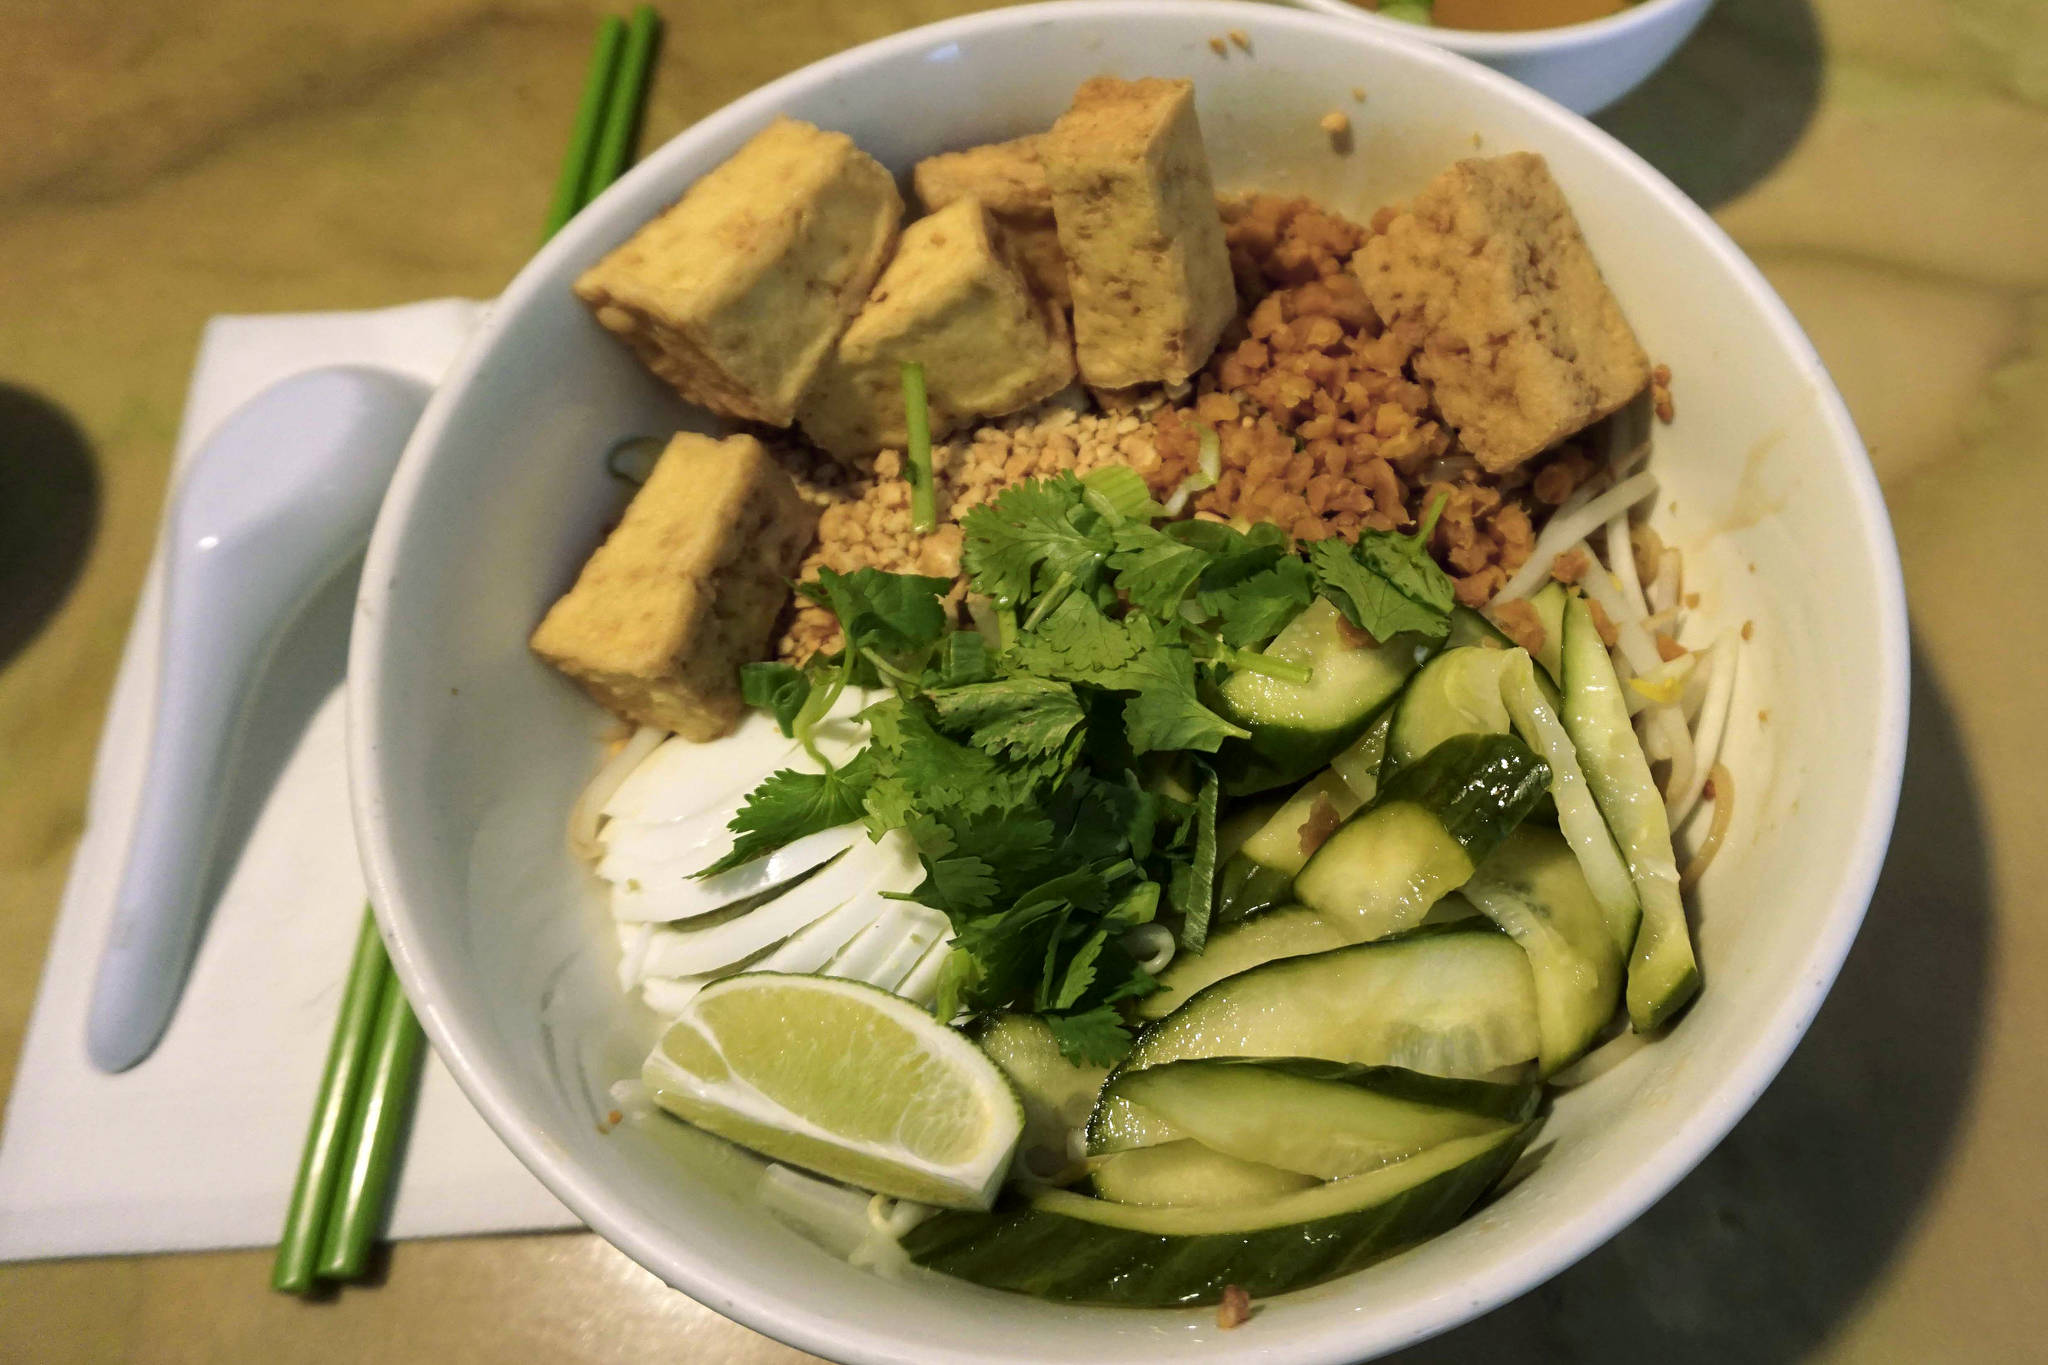 Battambang’s Favorite Noodle is one of the most popular dishes at Phnom Penh. Photo by Melissa Hellmann